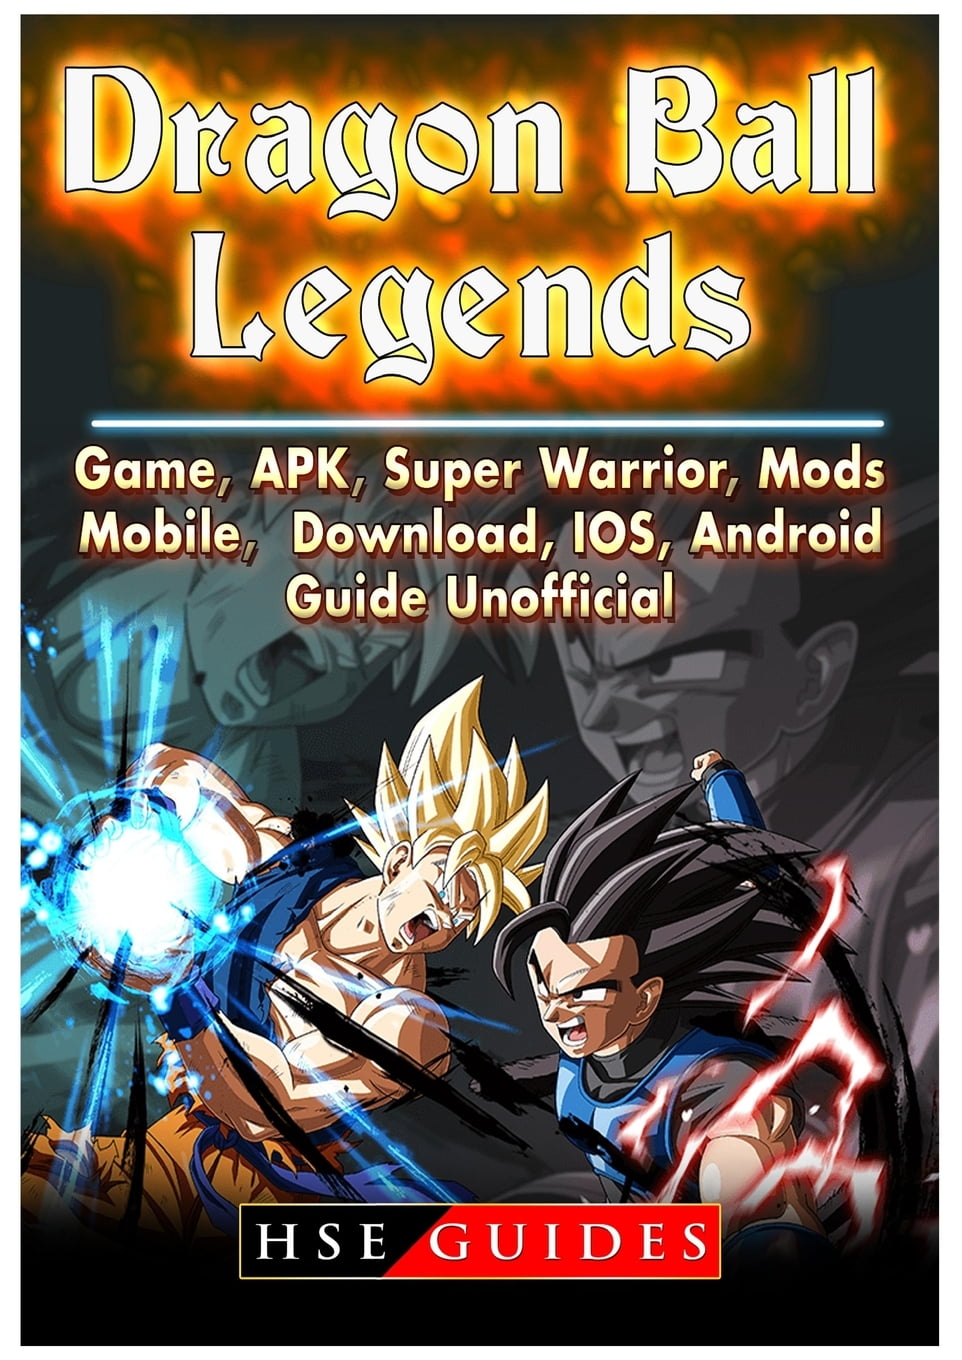 Dragon Ball Legends, Game, Apk, Super Warrior, Mods, Mobile, Download, Ios,  Android, Guide Unofficial (Paperback)